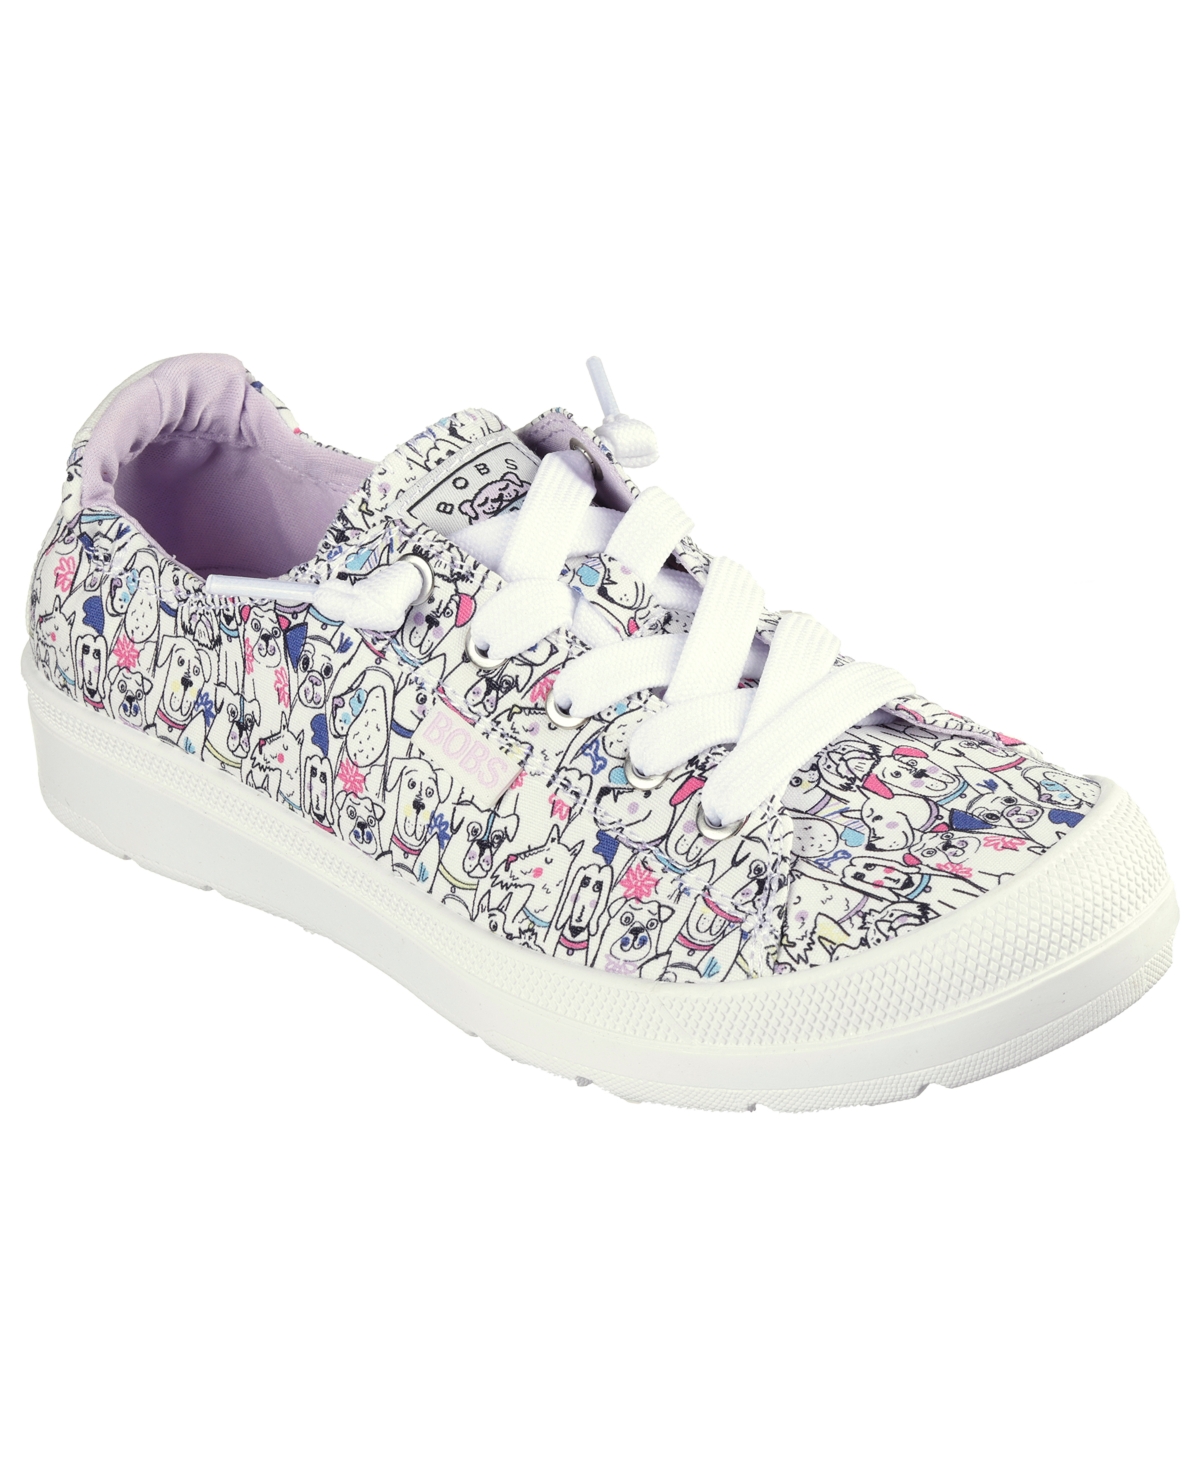 Women's Bobs Beyond - Doodle Fest Casual Sneakers from Finish Line - White, Multi